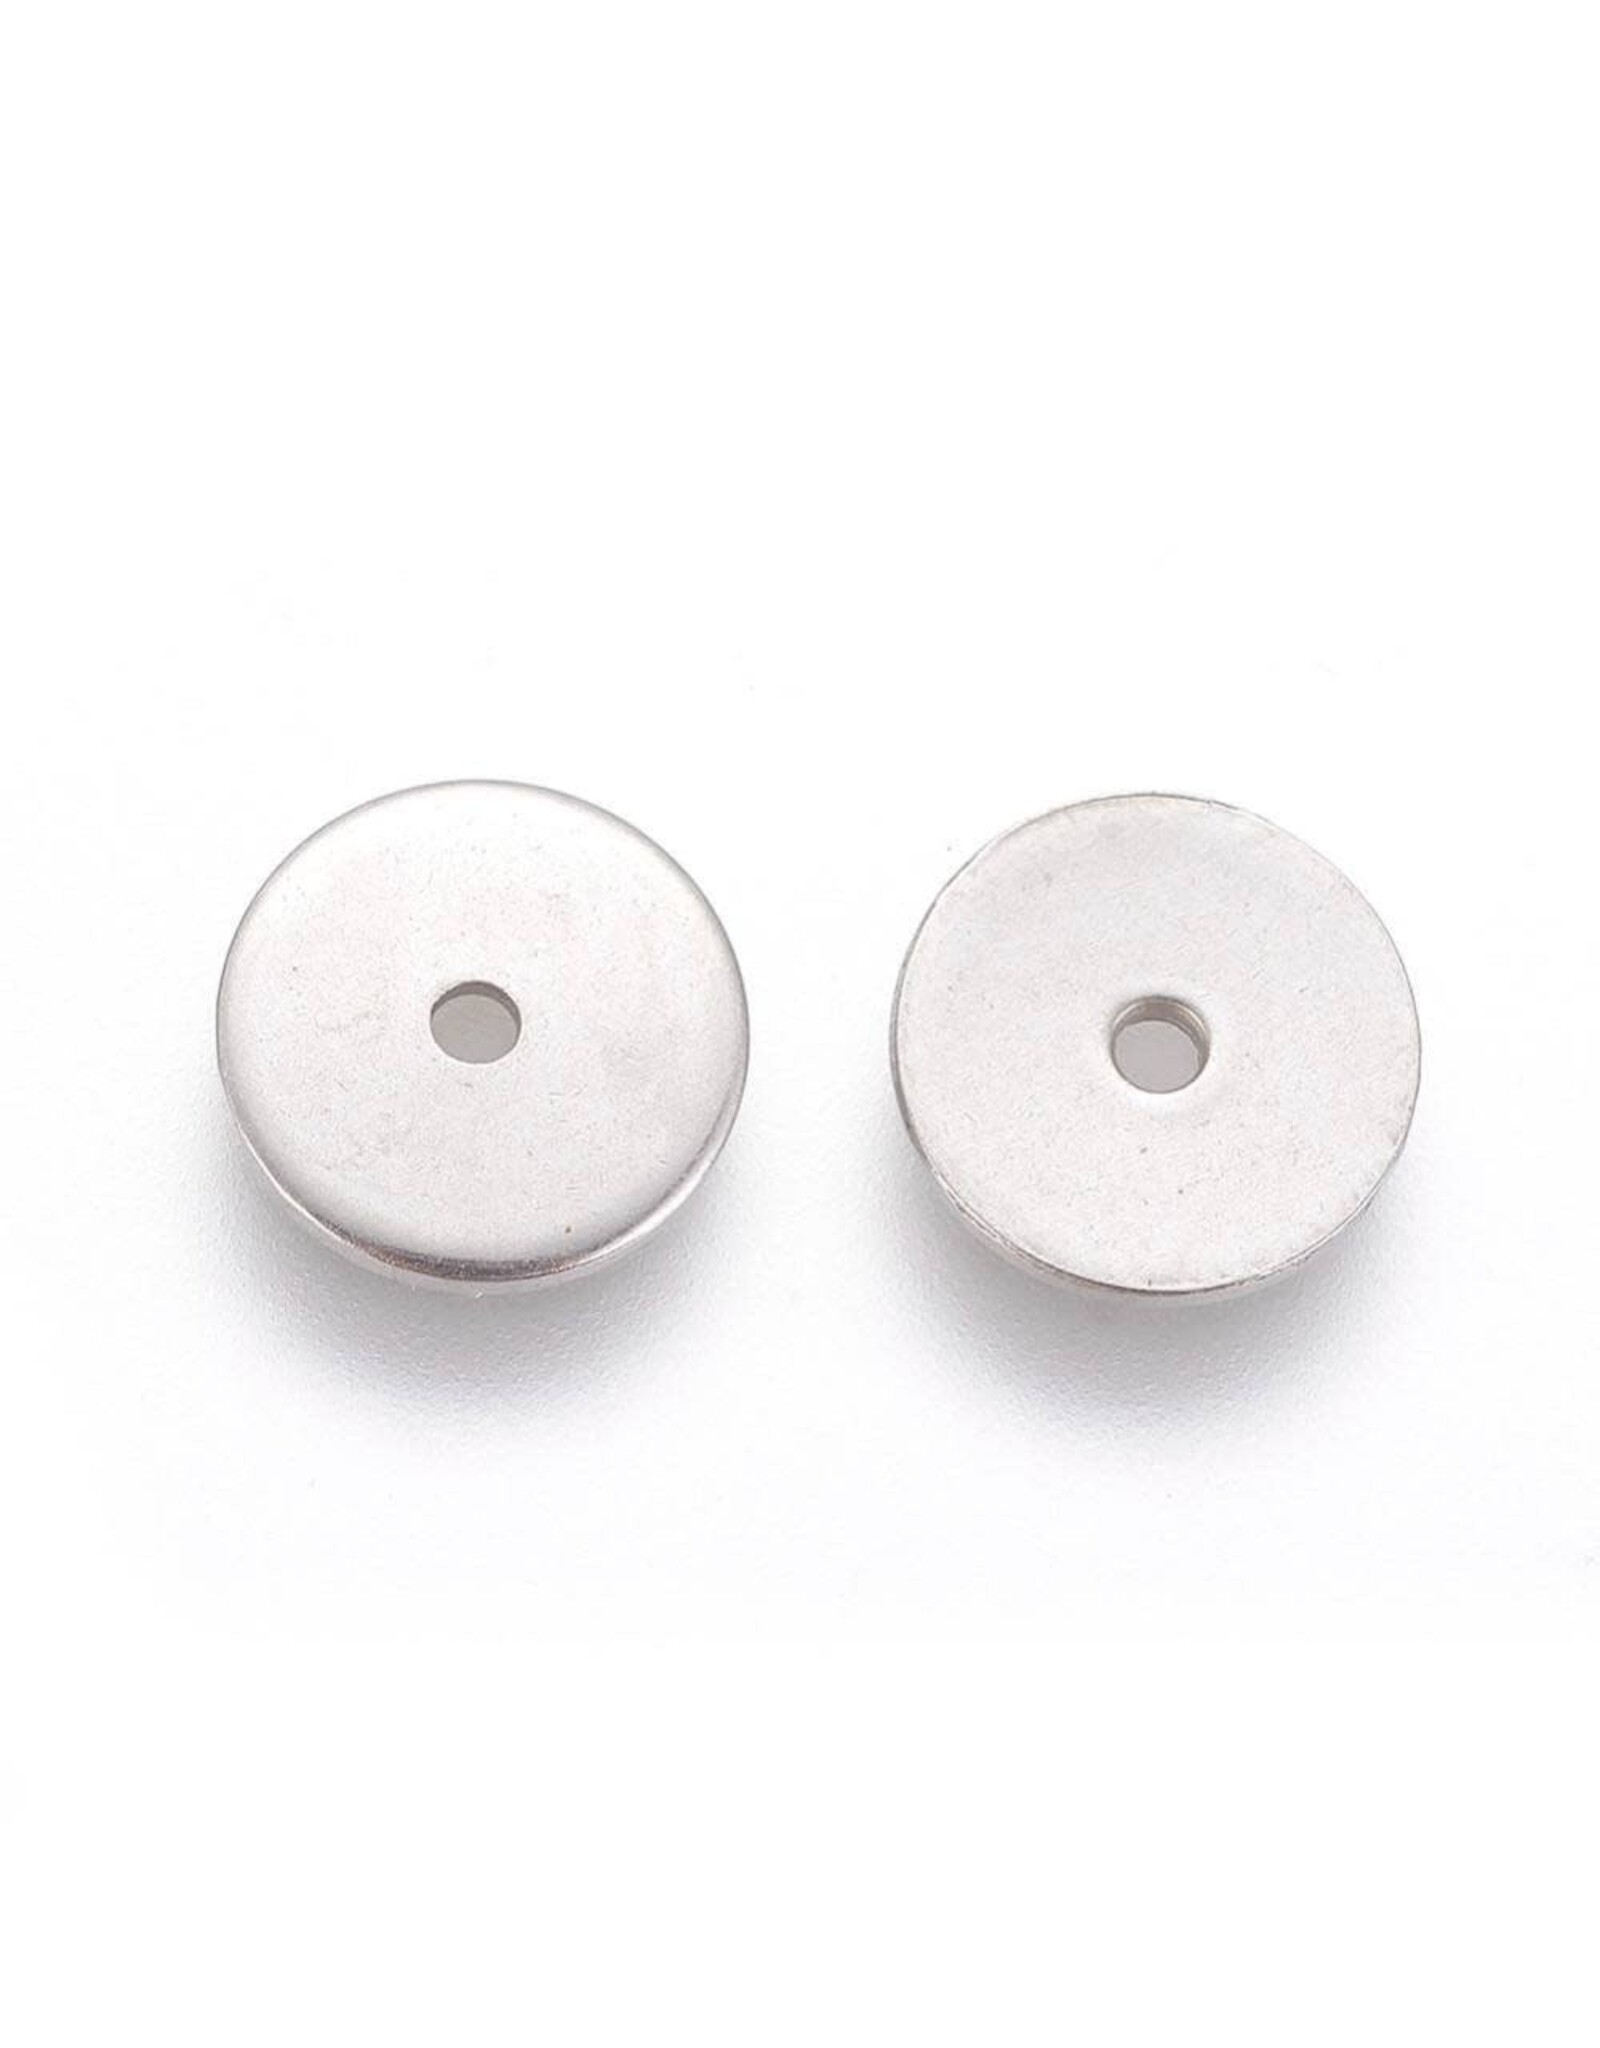 Disc Spacer Bead  Stainless Steel  8x.8mm   x50